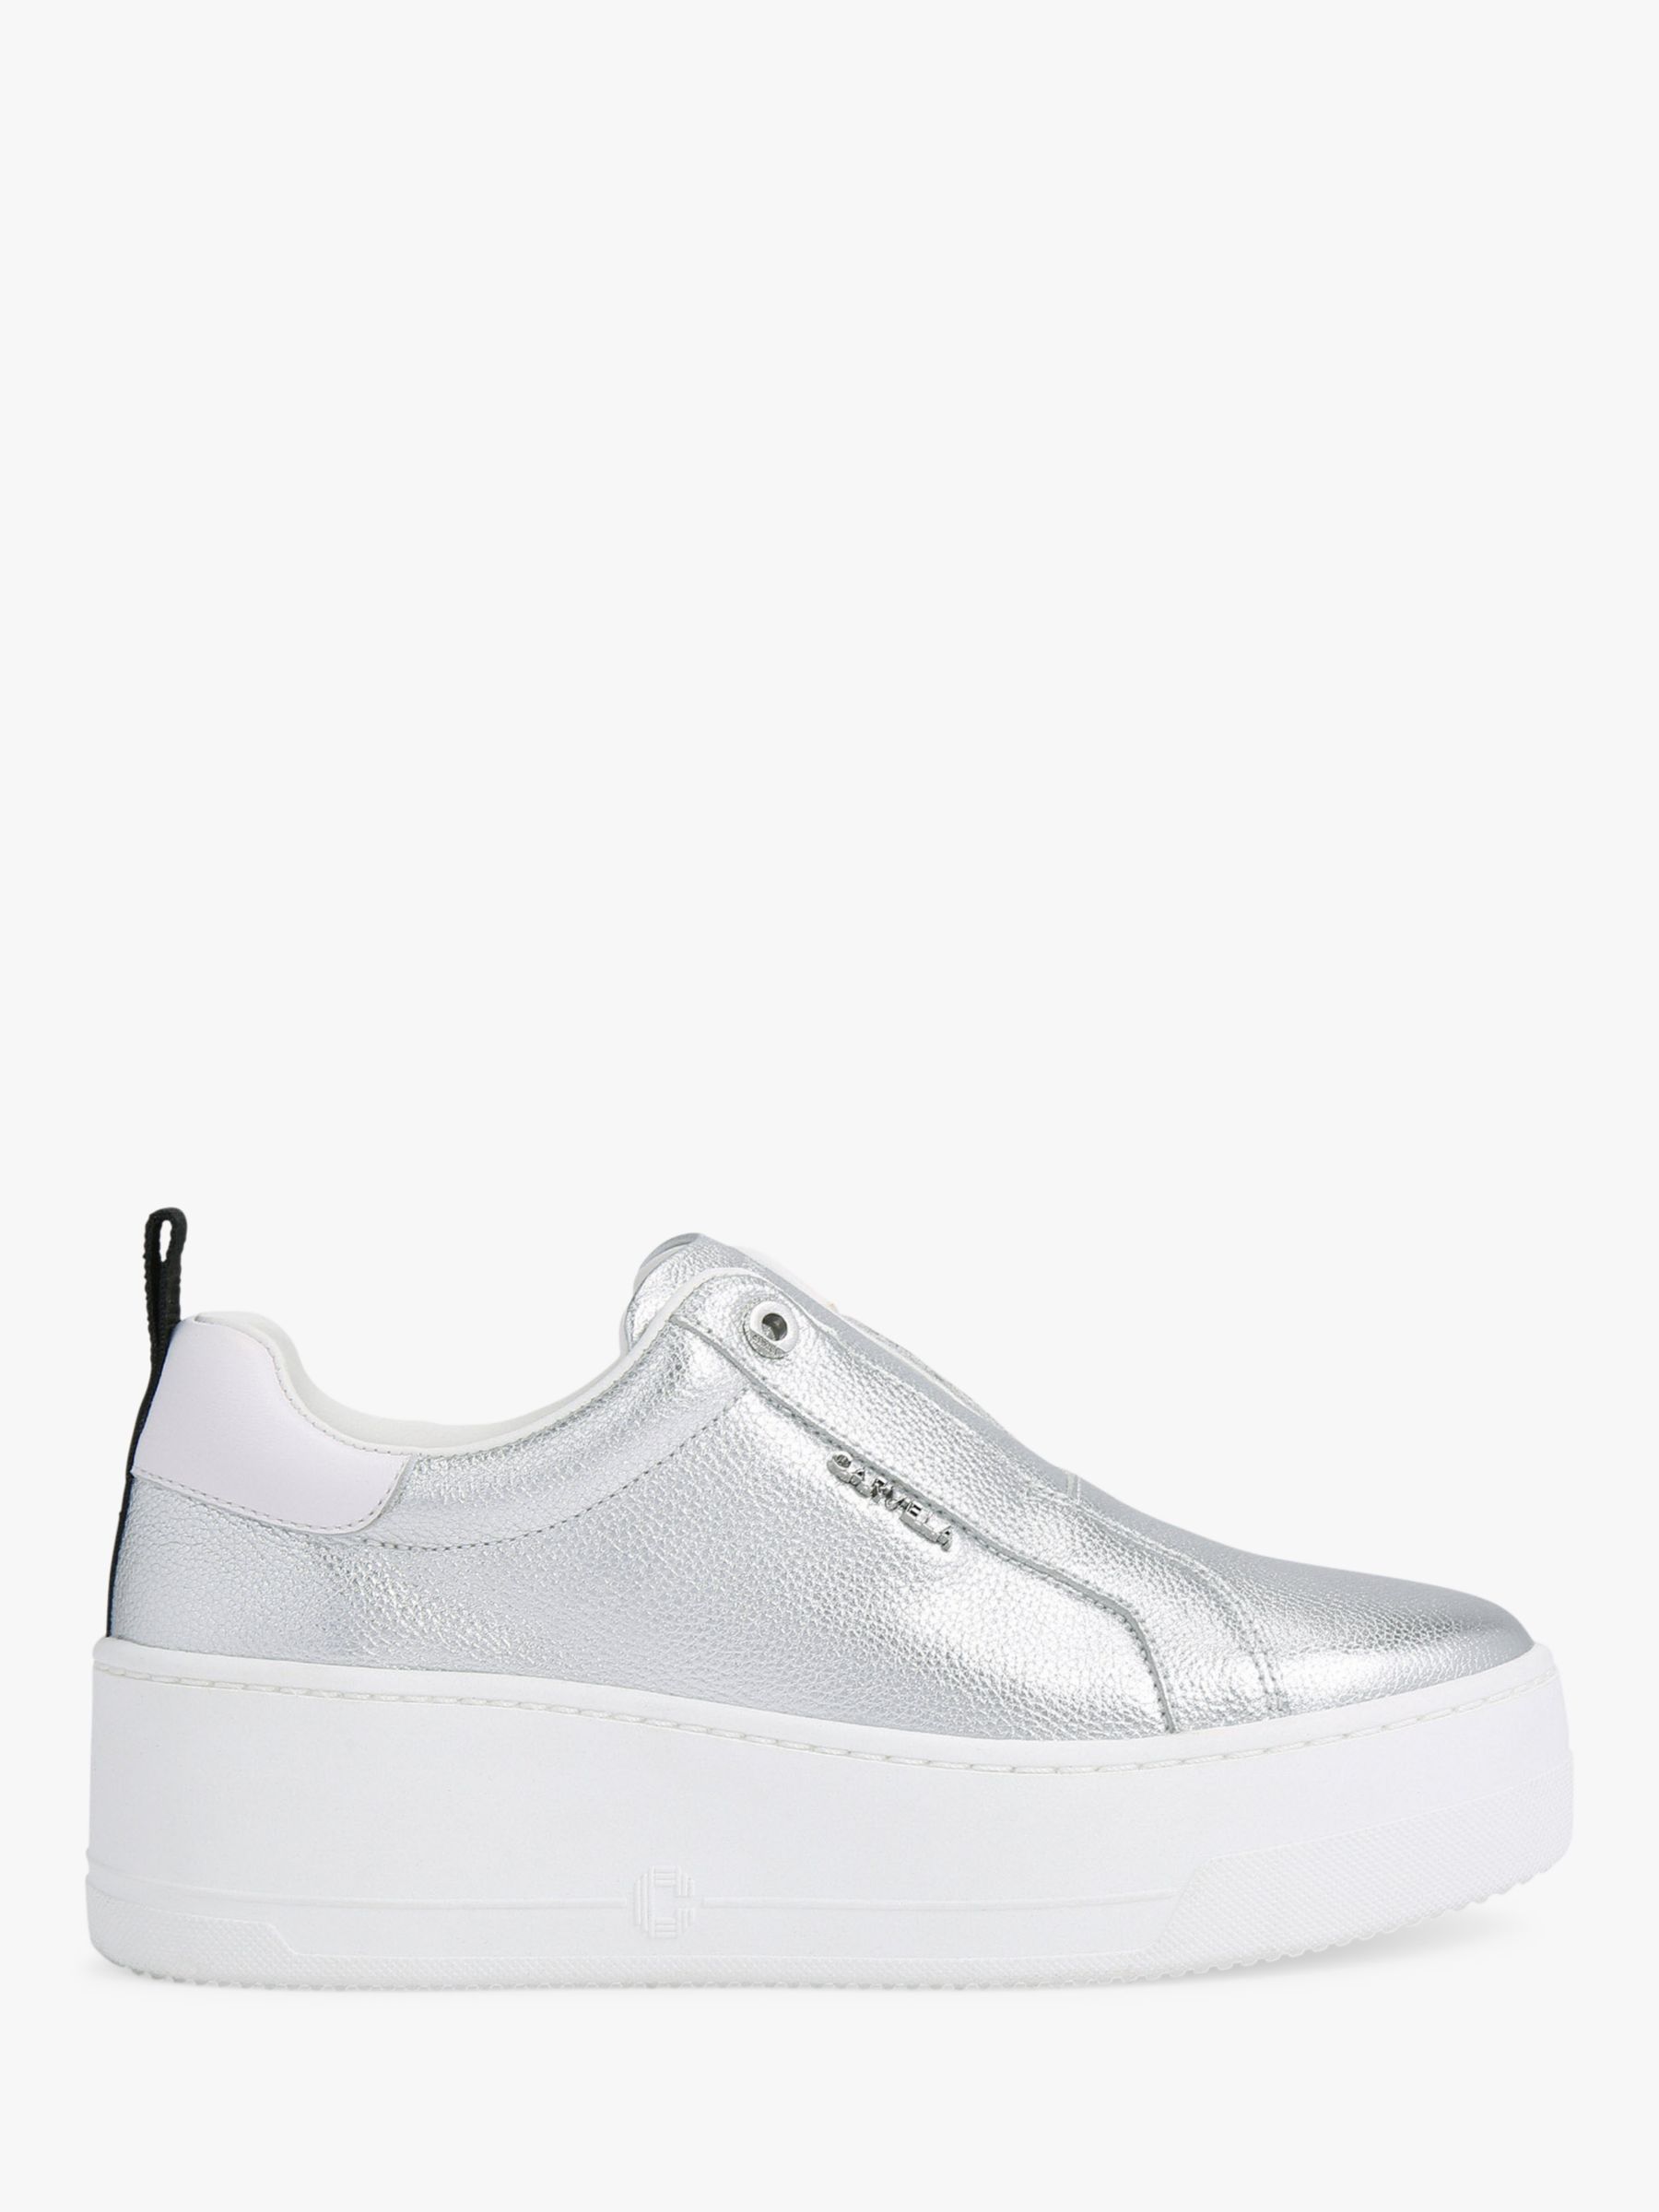 Carvela Connected Leather Platform Trainers, Silver at John Lewis ...